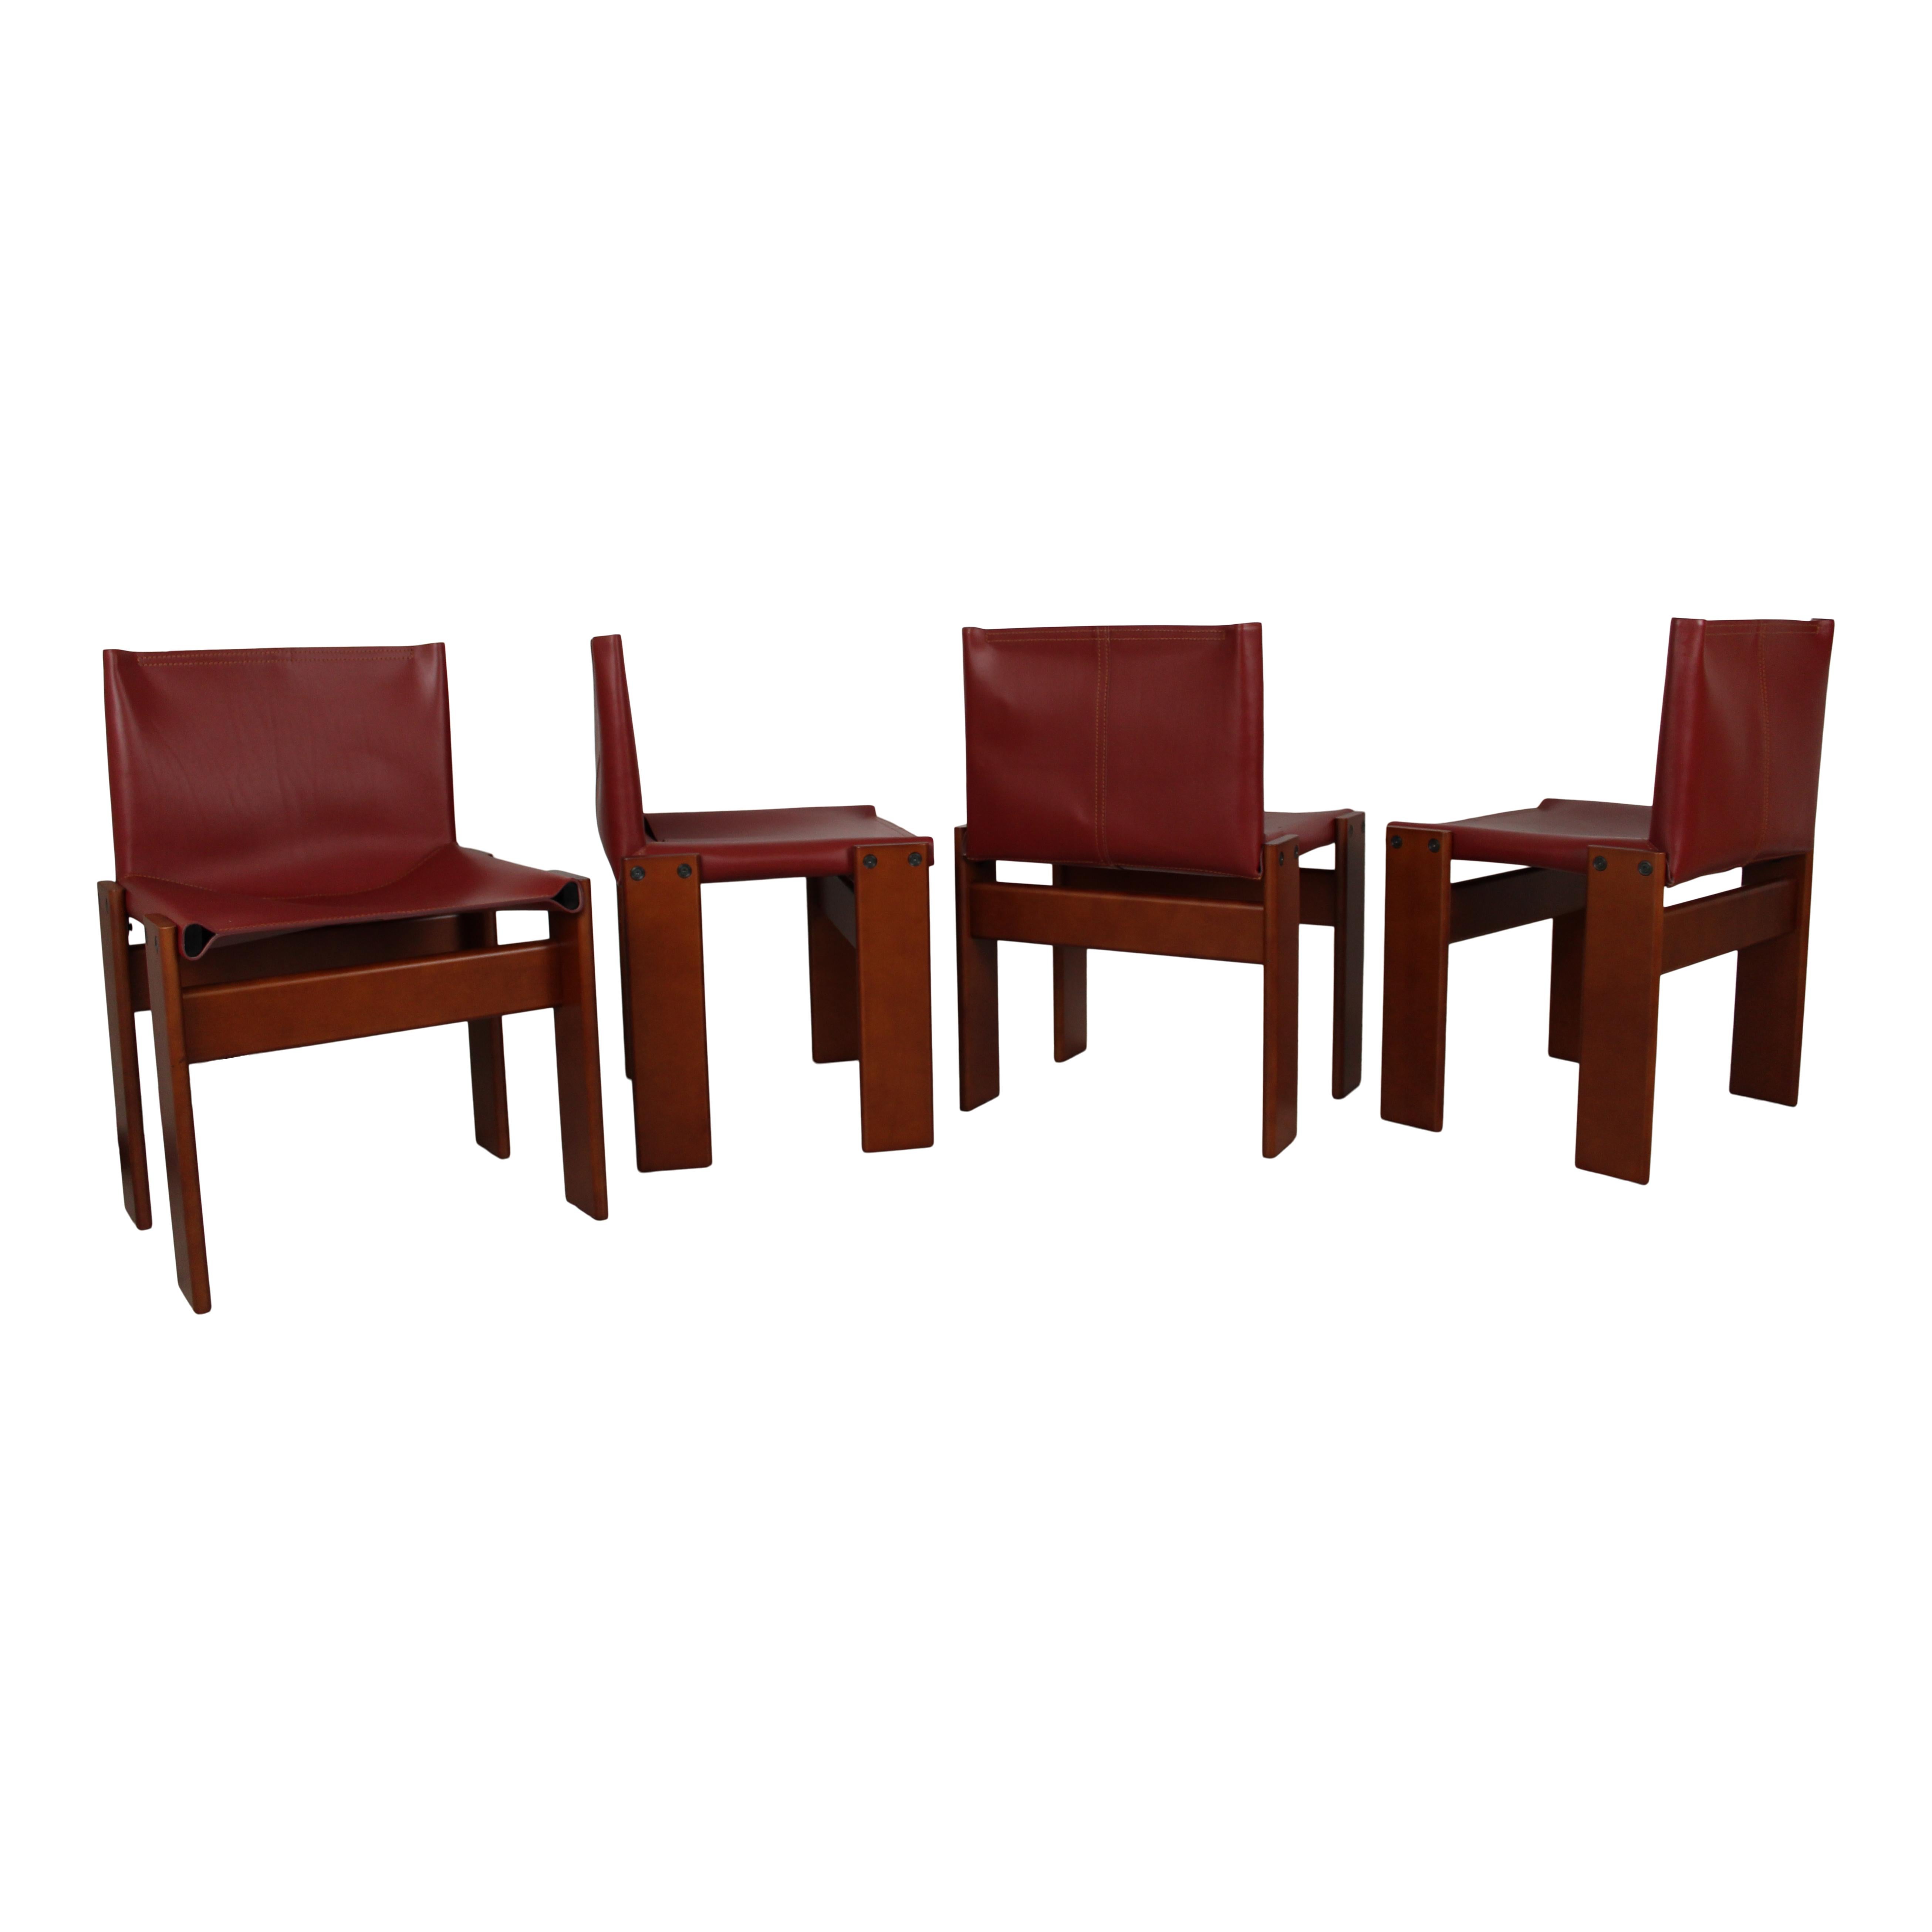 Italian Afra & Tobia Scarpa English Red Leather Monk Dining Chair for Molteni, Set of 10 For Sale